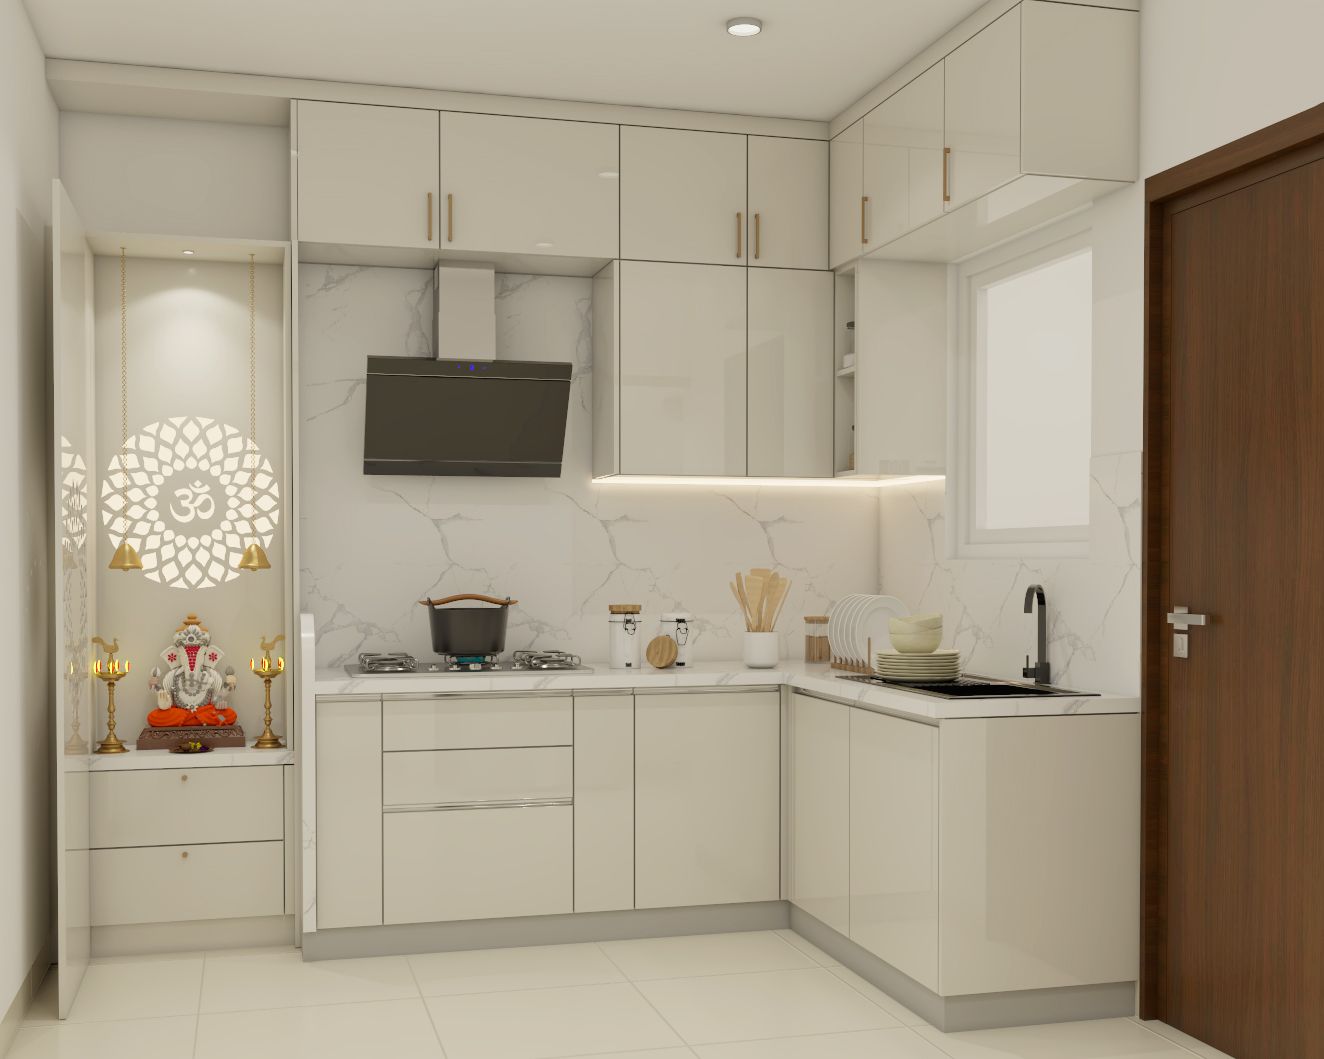 Contemporary Modular Frosty White L-Shaped Kitchen Design With Integrated Mandir Unit